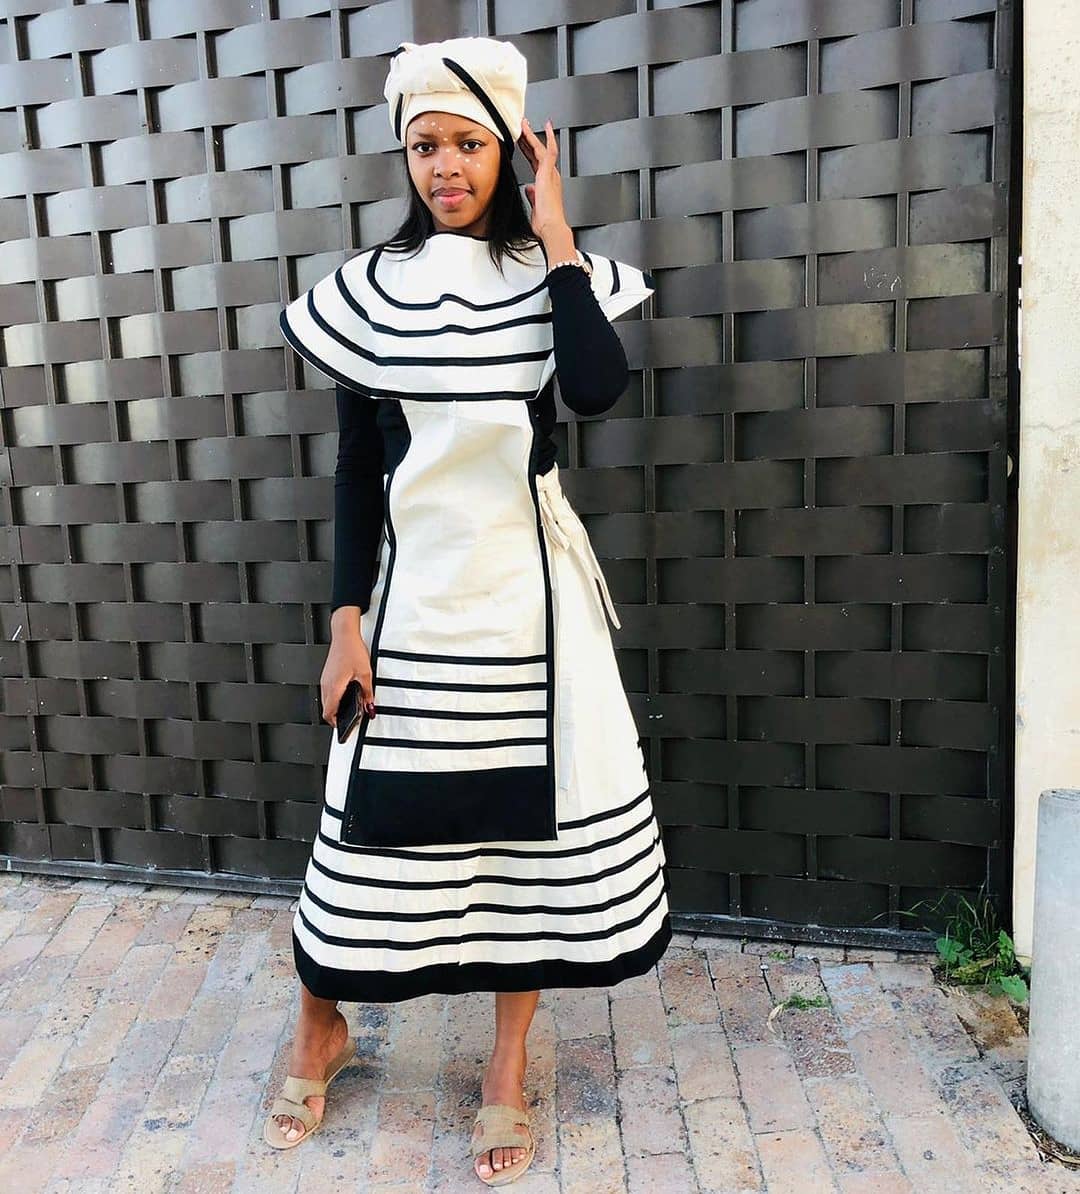 Xhosa clothing 2021 for African women - dresses designs